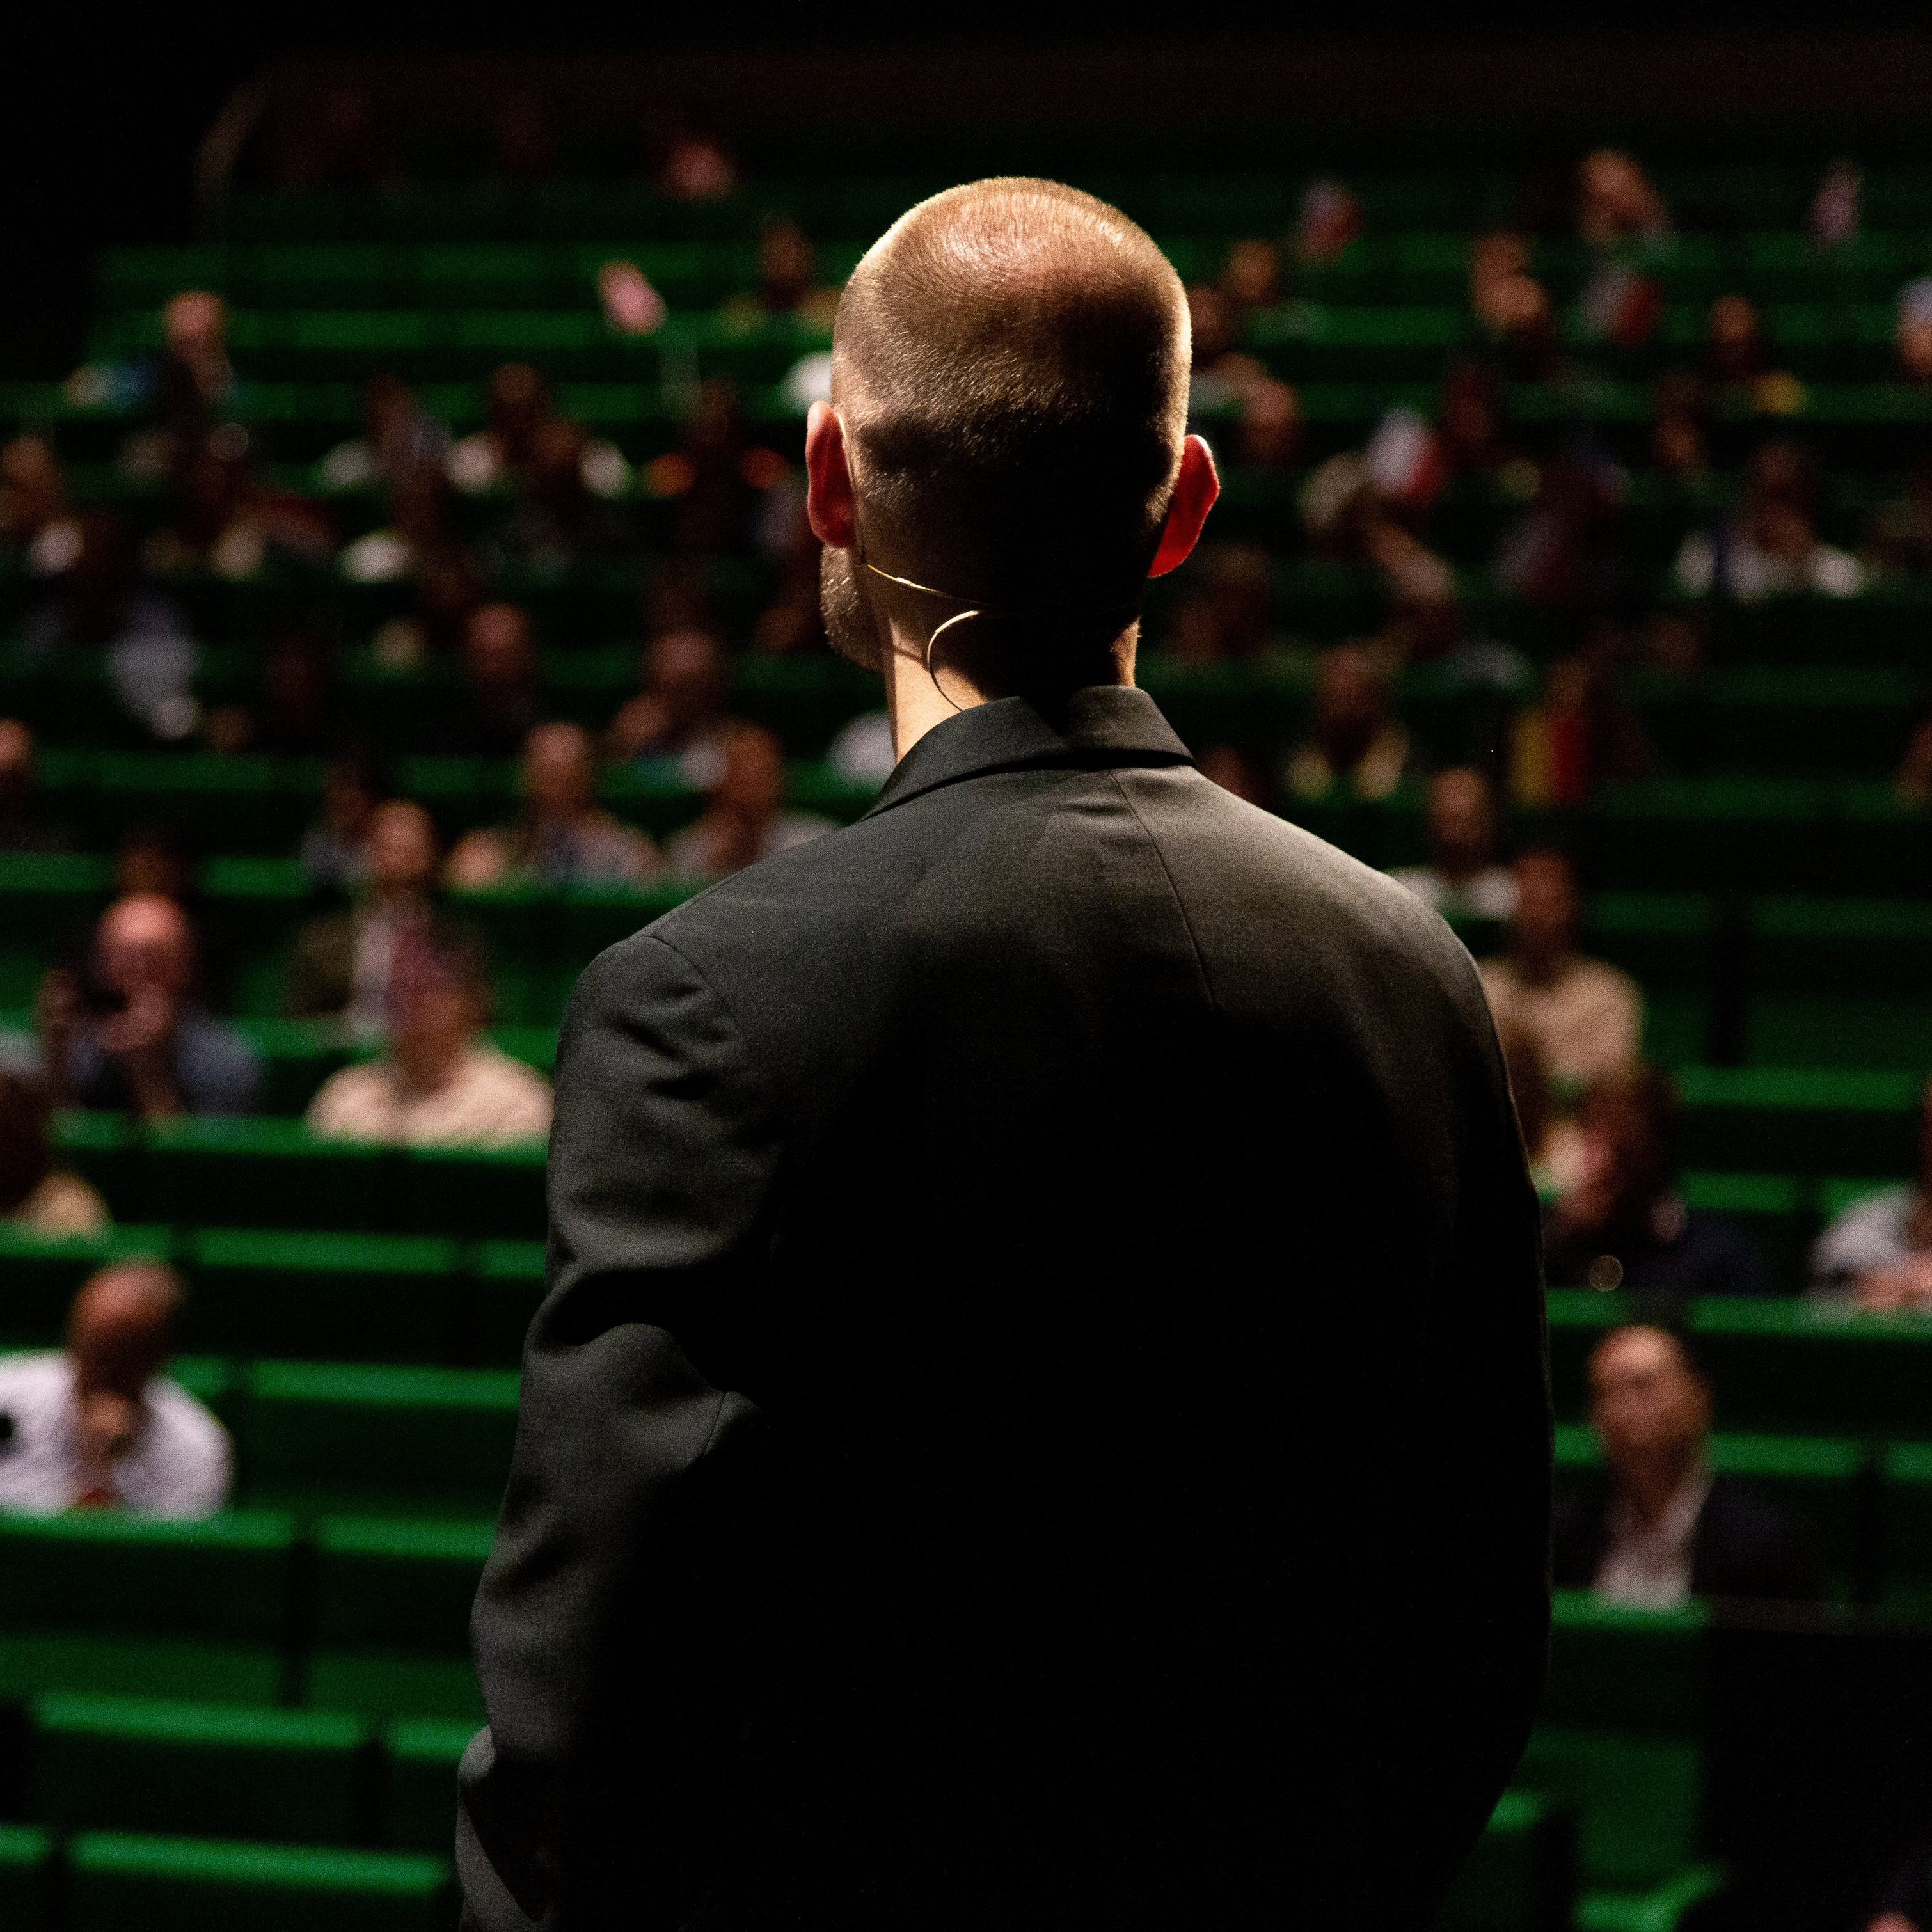 Man in black suit facing an audience in a green-seated auditorium.